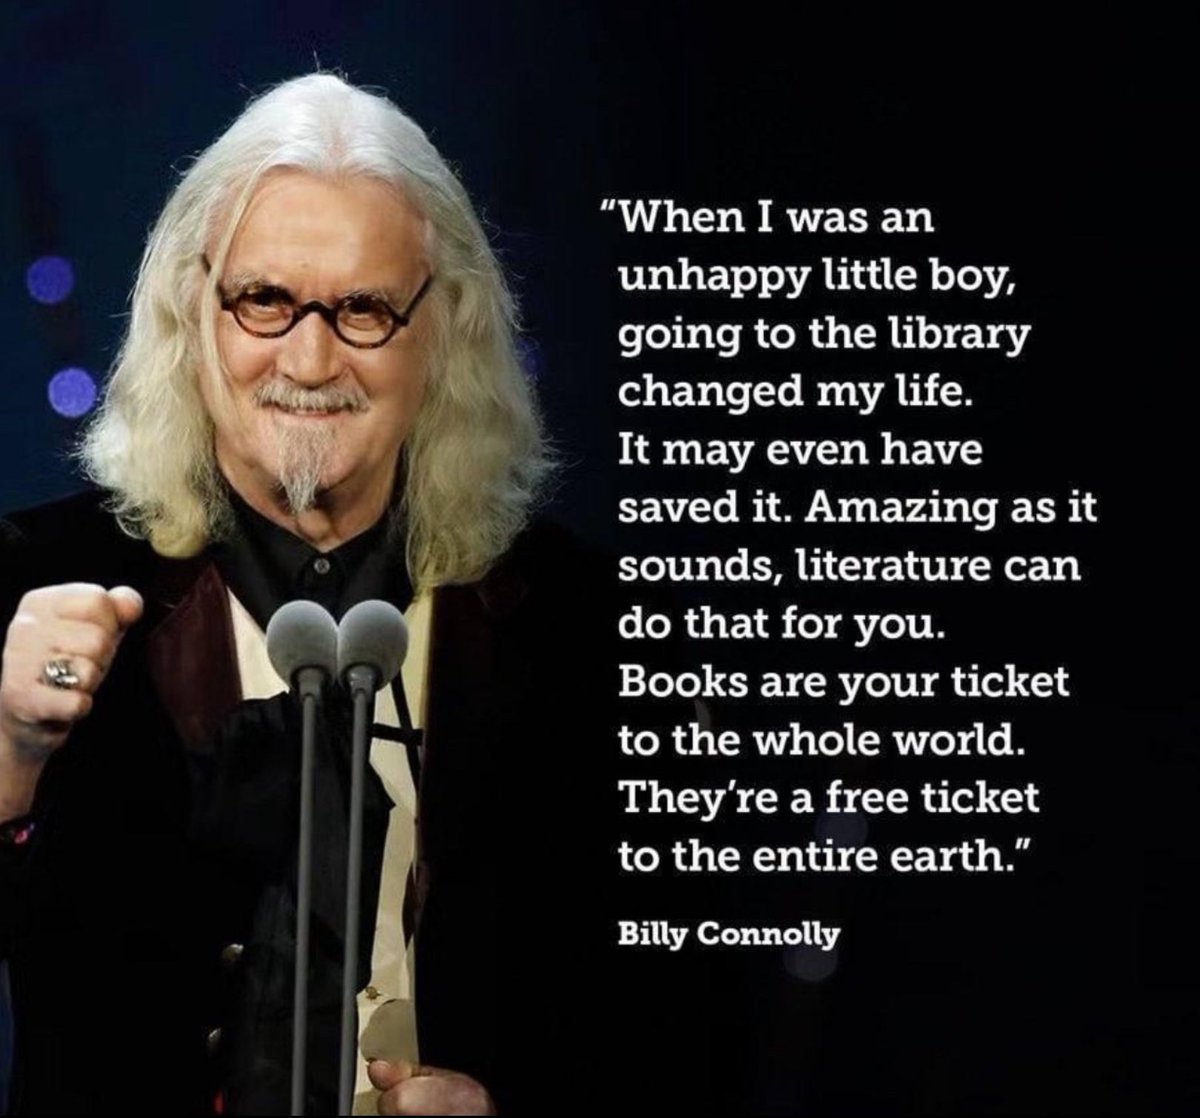 I’ve been to so many places without ever leaving my couch. Go get lost in a book today. 📚😊 #booksbooksbooks #freeticket #billyconnolly #thursdaythoughts